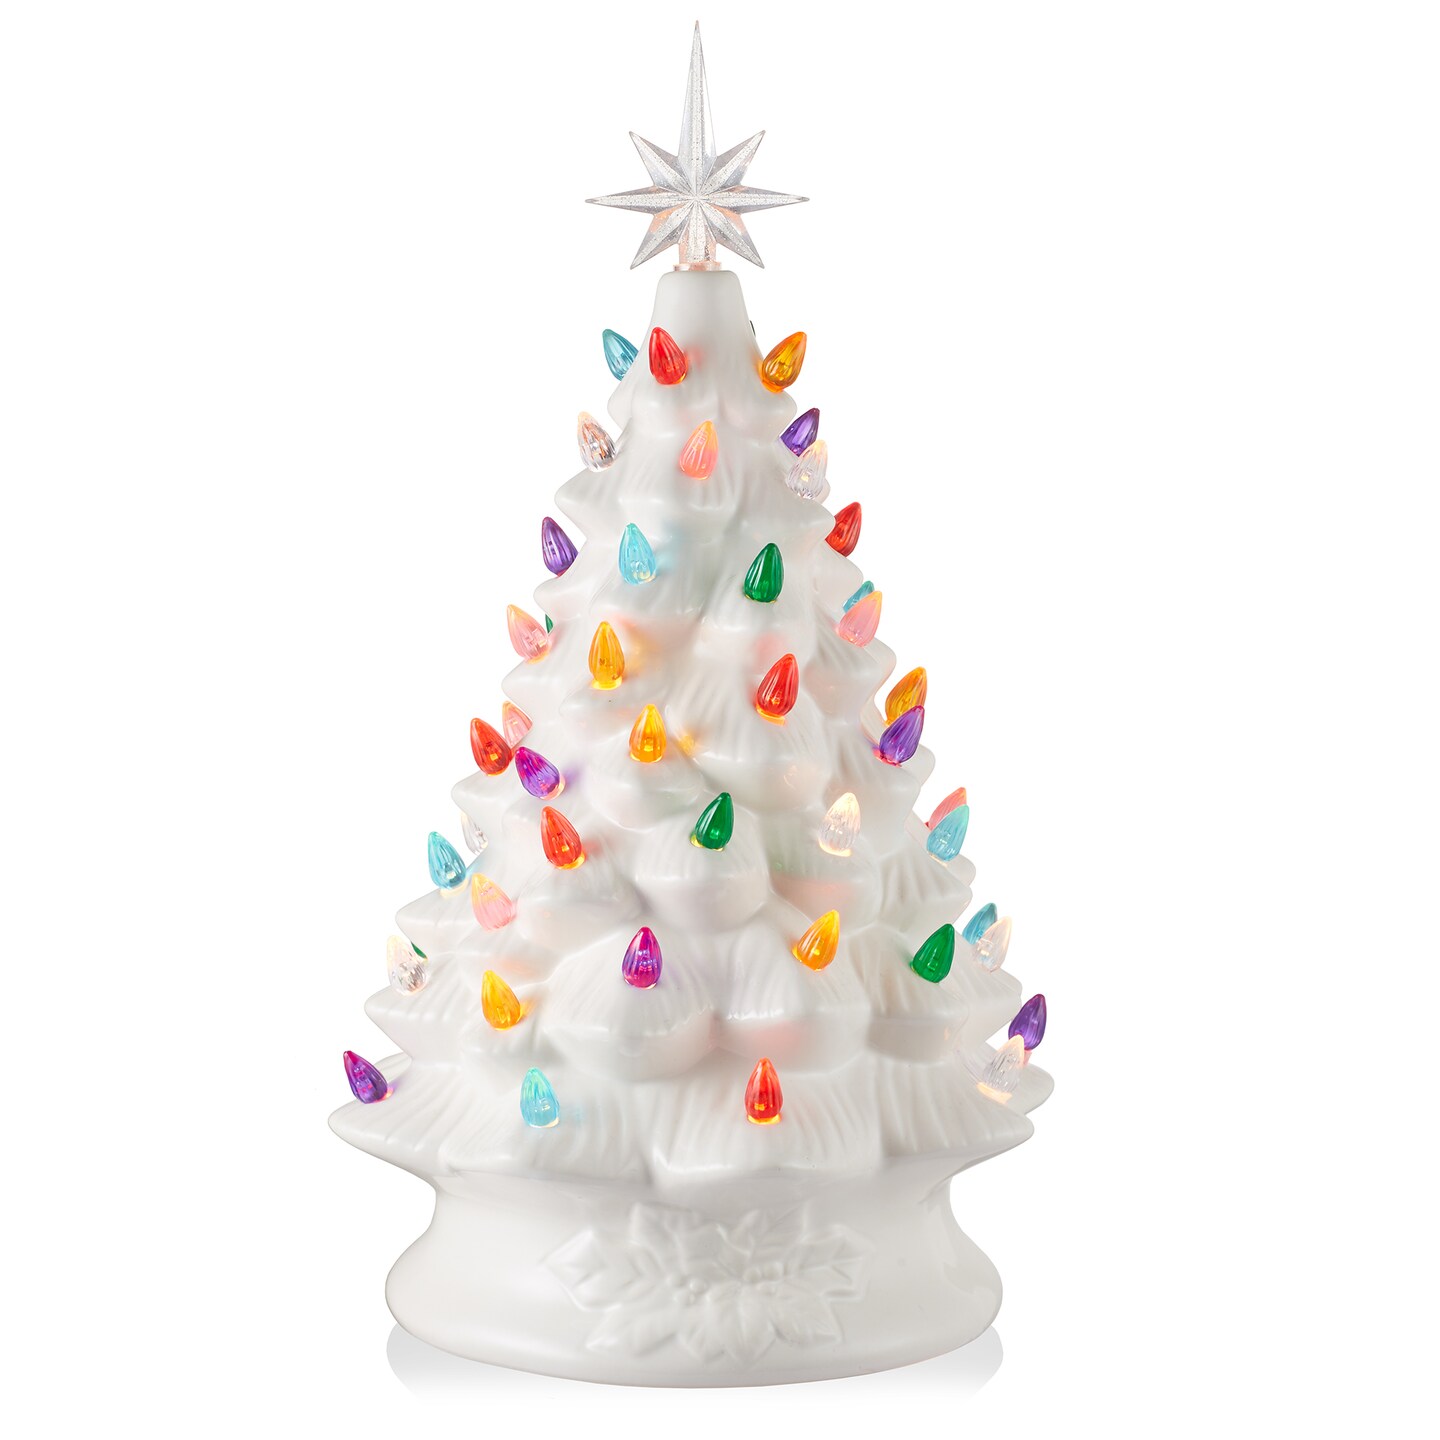 Casafield Hand Painted Ceramic Christmas Tree, White 15-Inch Pre-Lit Tree with 128 Multi Color Lights and 2 Star Toppers